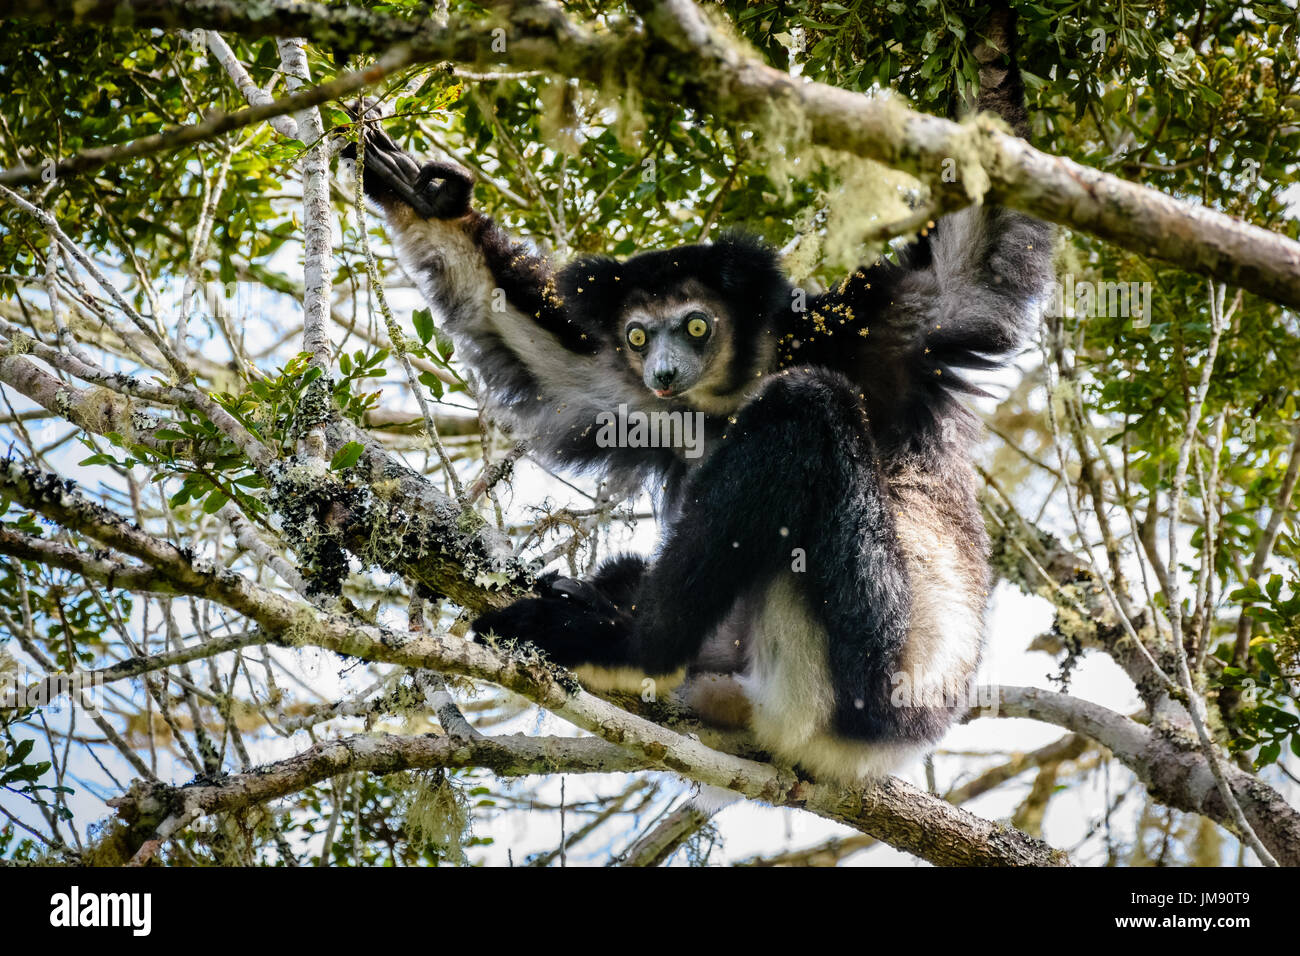 Endangered Indri Lemur hanging in tree canopy looking at camera surrounded by leaves and flowers Stock Photo